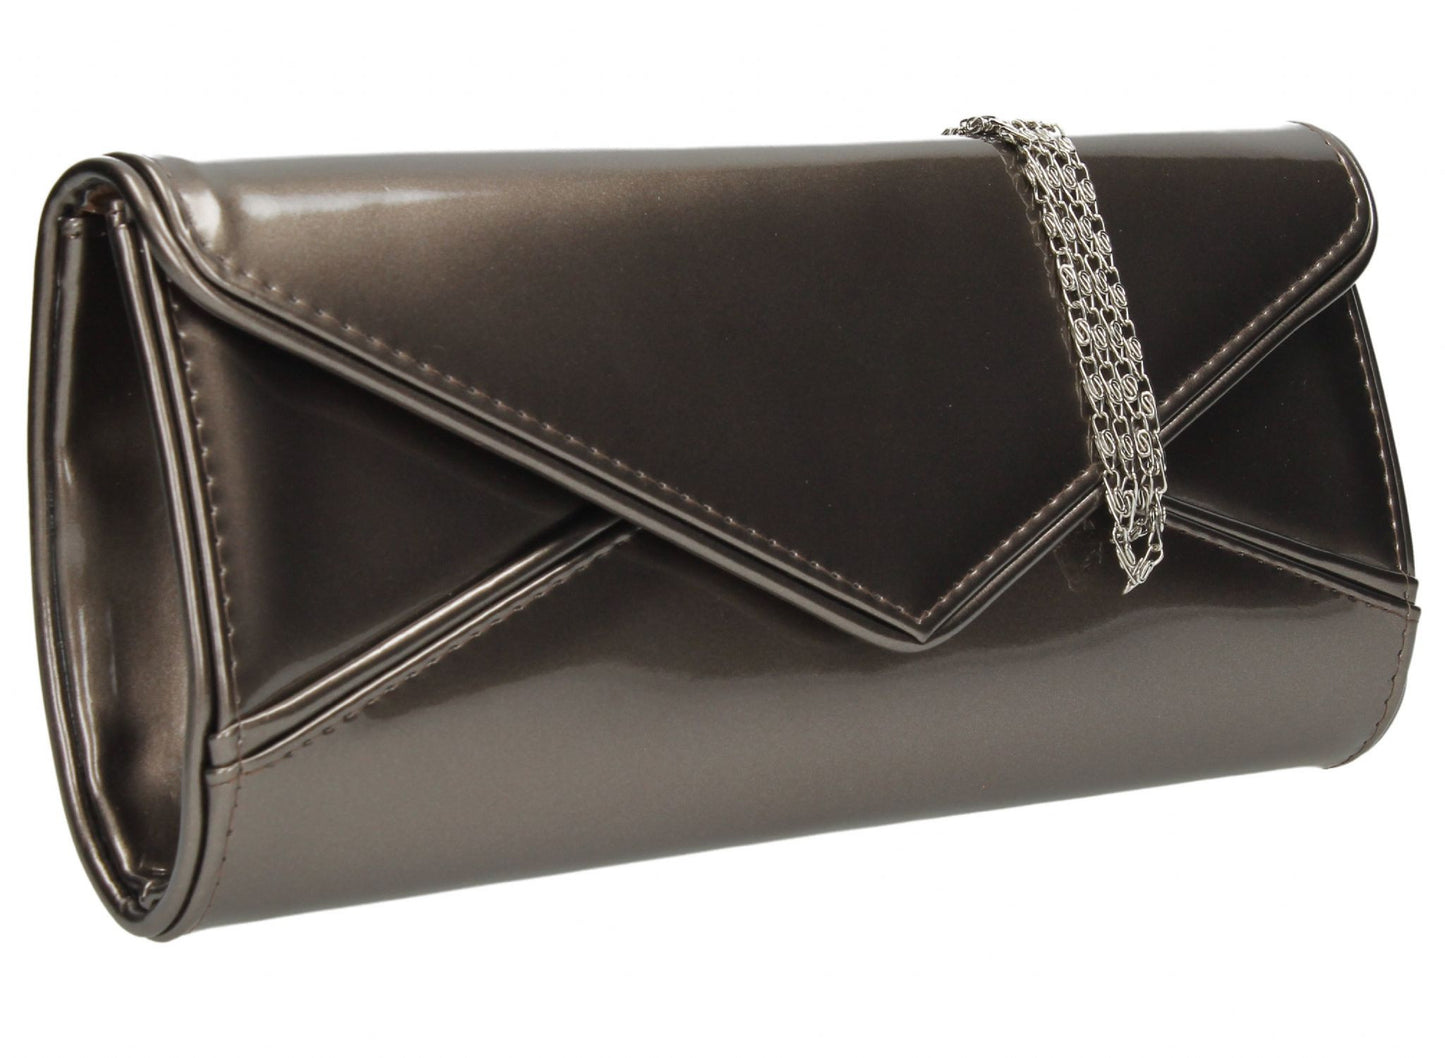 SWANKYSWANS Perry Patent Clutch Bag - Pewter Cute Cheap Clutch Bag For Weddings School and Work